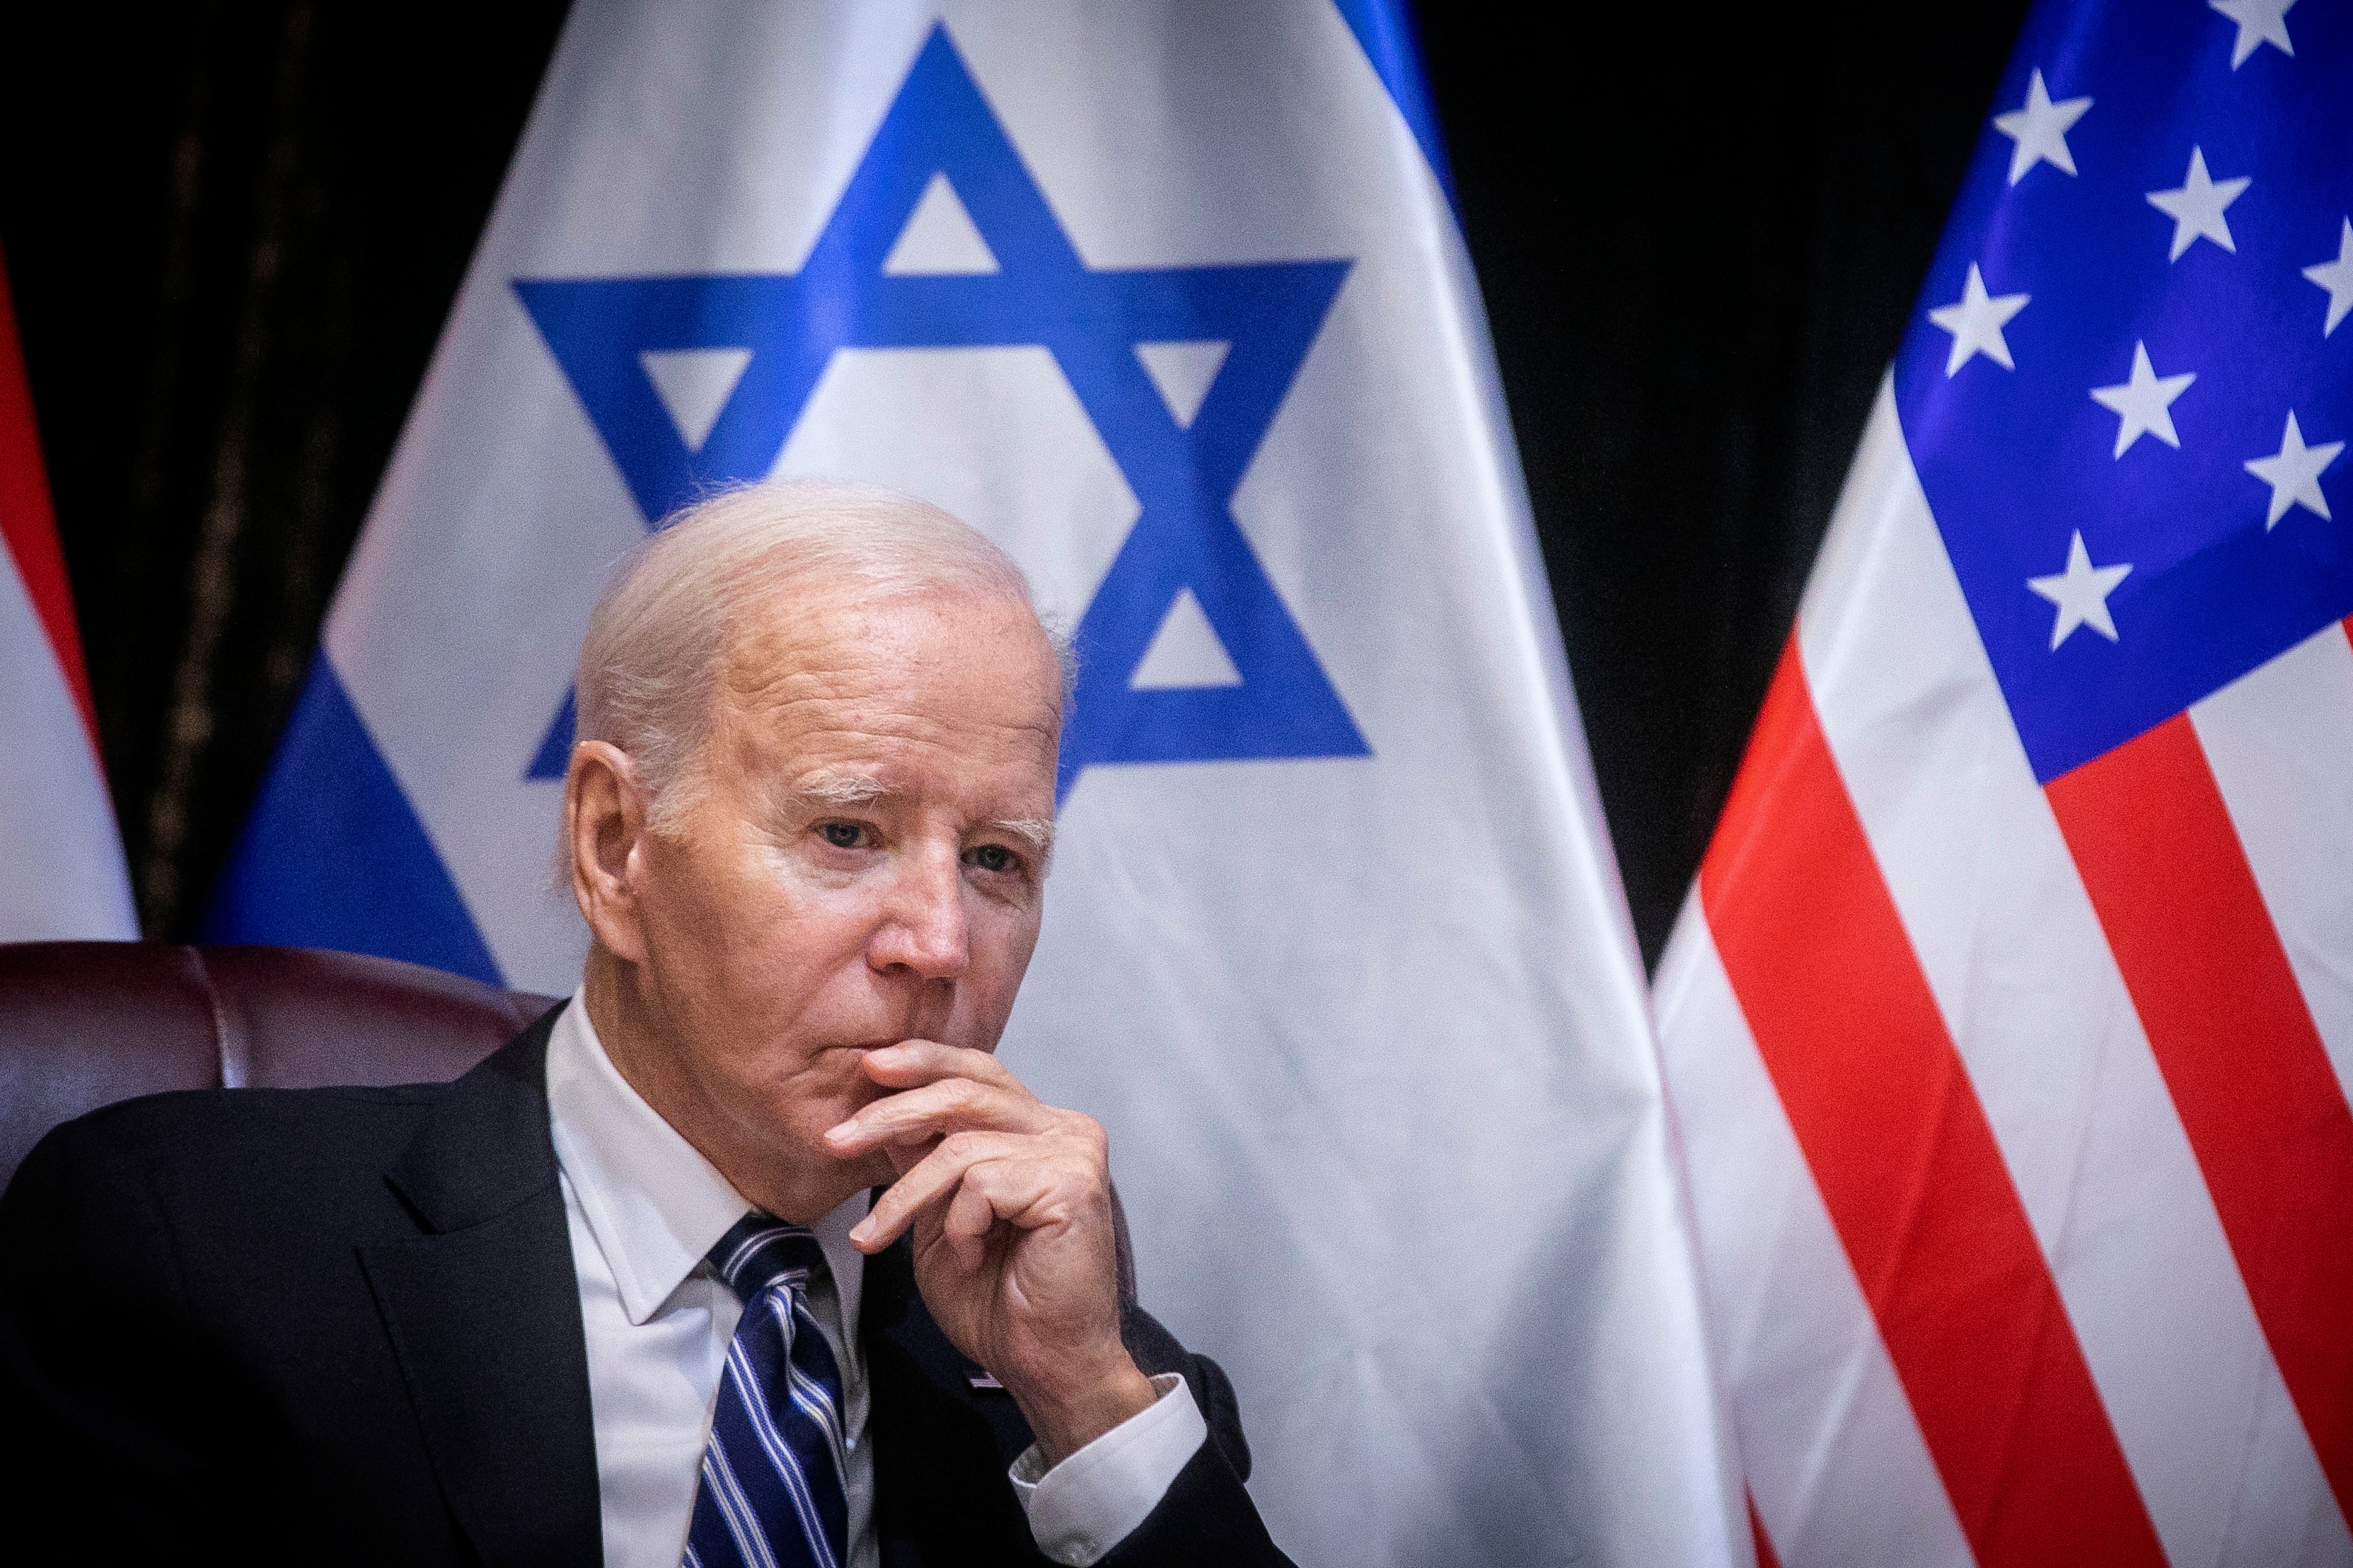 Biden seems to represent to voters an old-fashioned Zionism